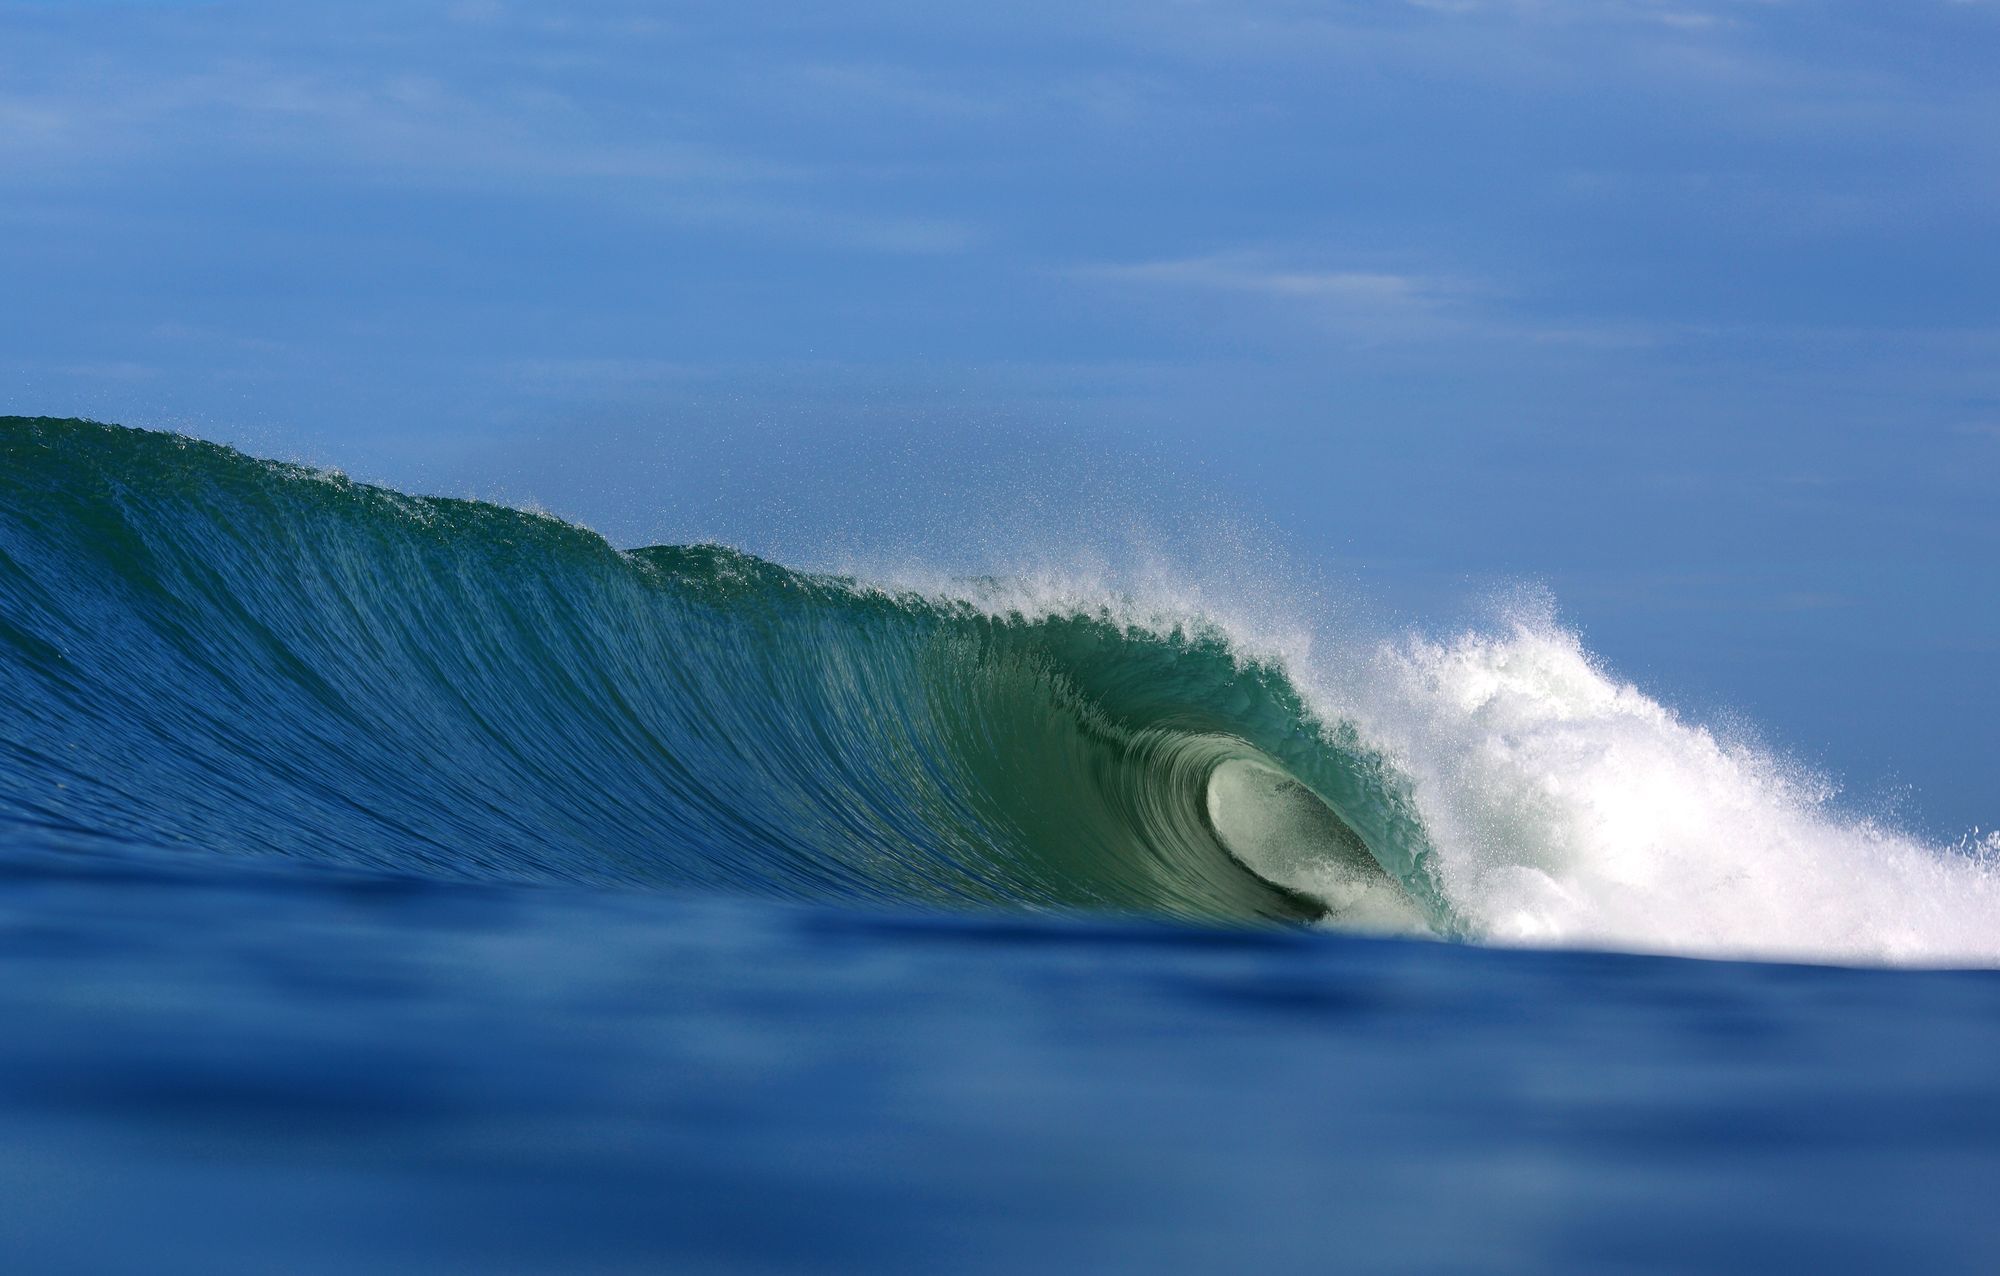 sumatra, one of the most consistent surf spots in the world